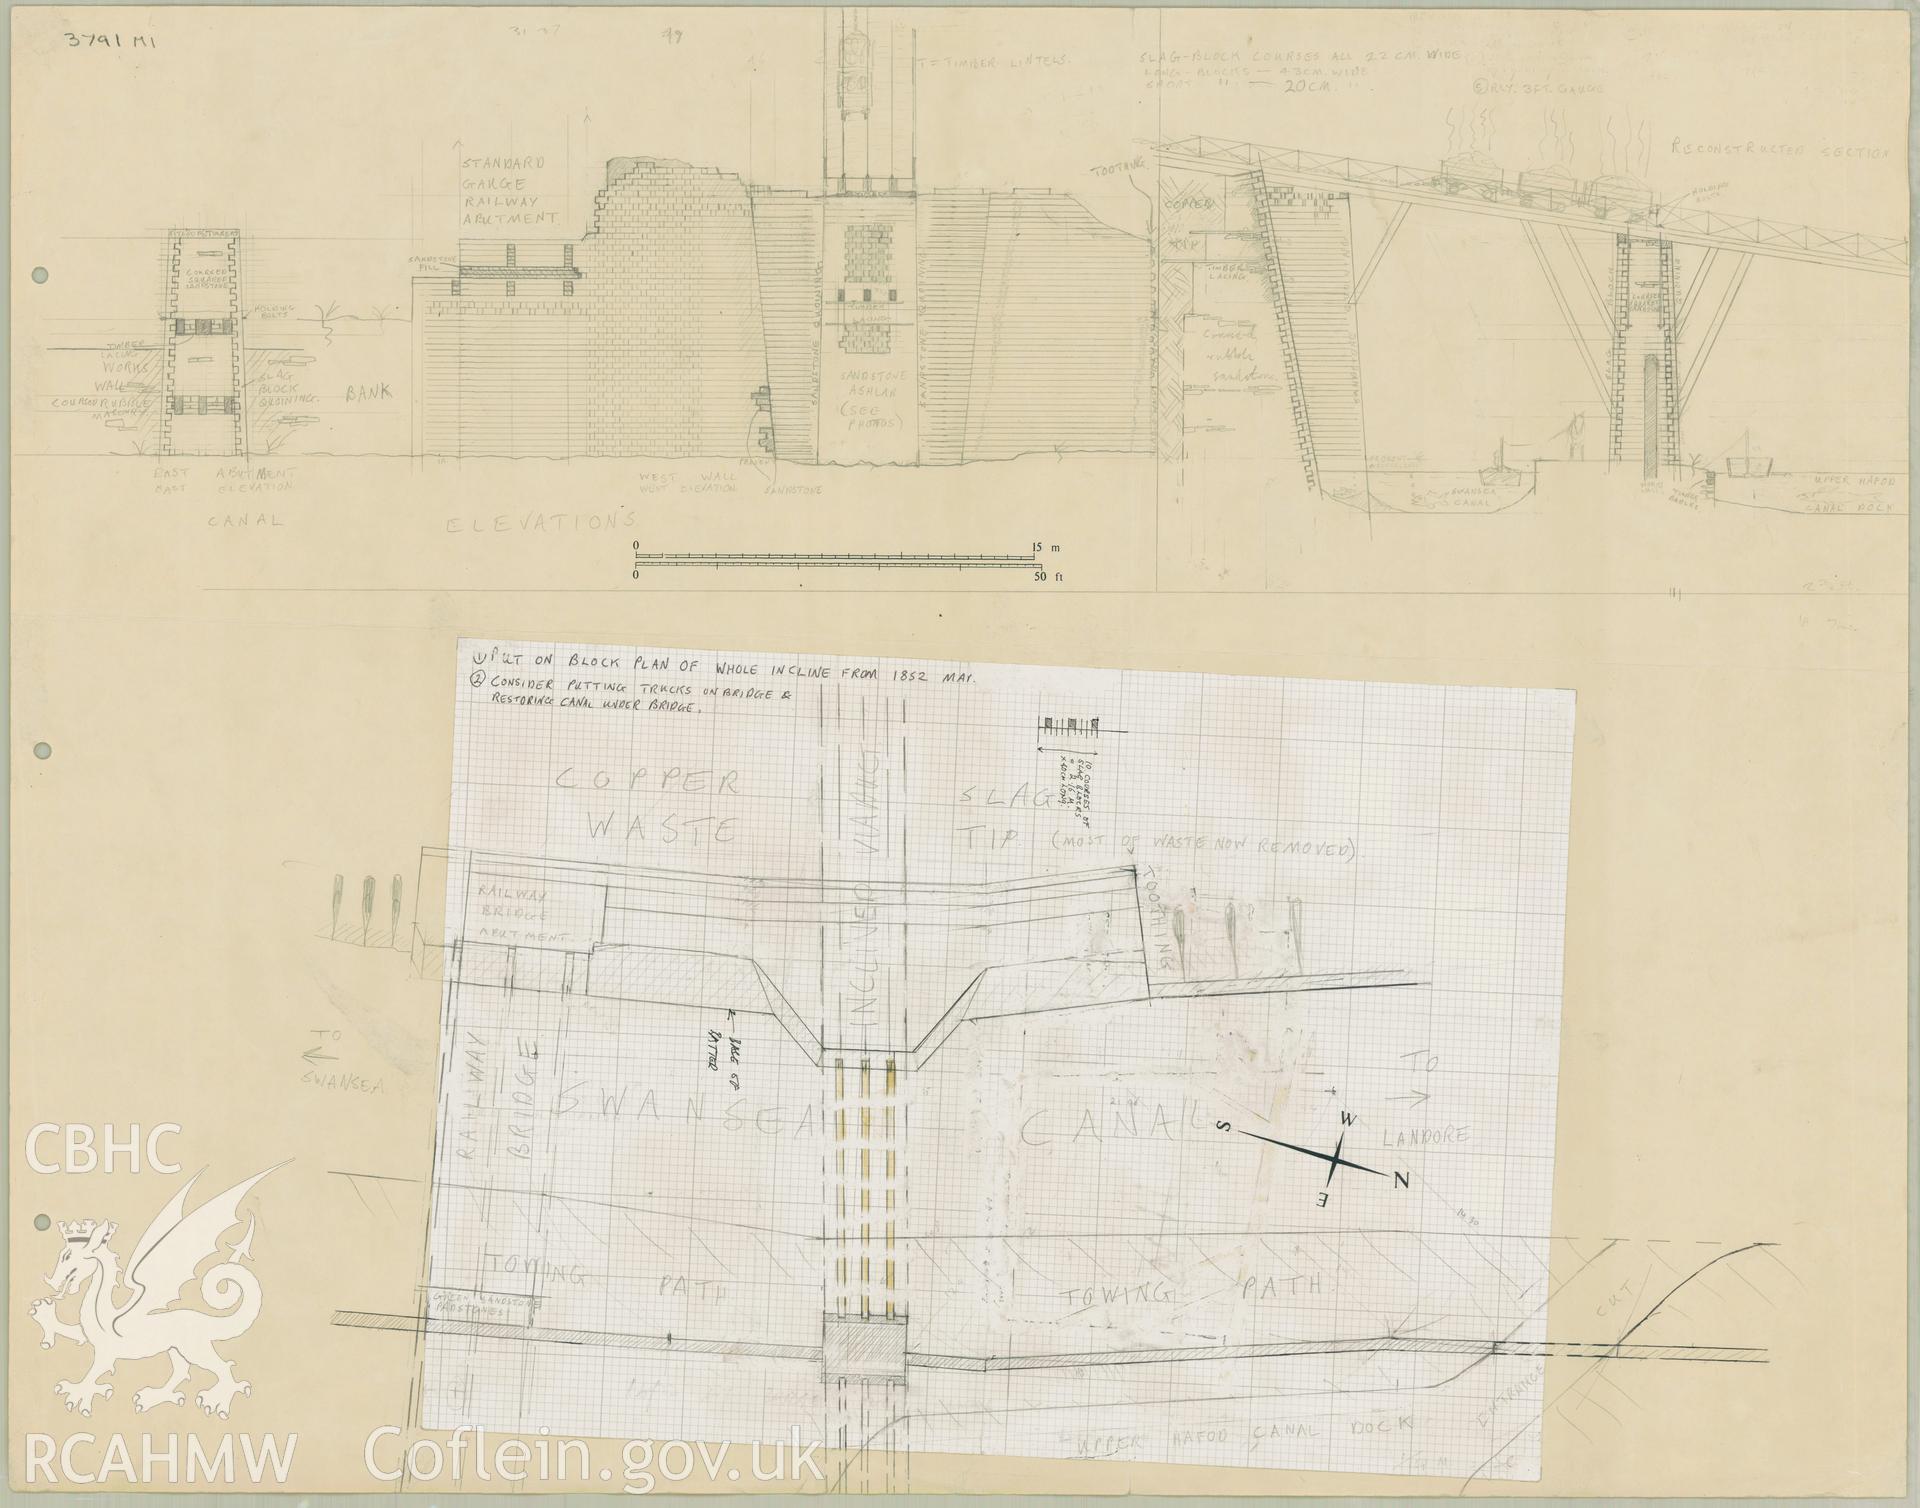 Preliminary plan and elevation drawing of Hafod Copperworks Tramway Viaduct, produced by Stepehn Hughes , undated.